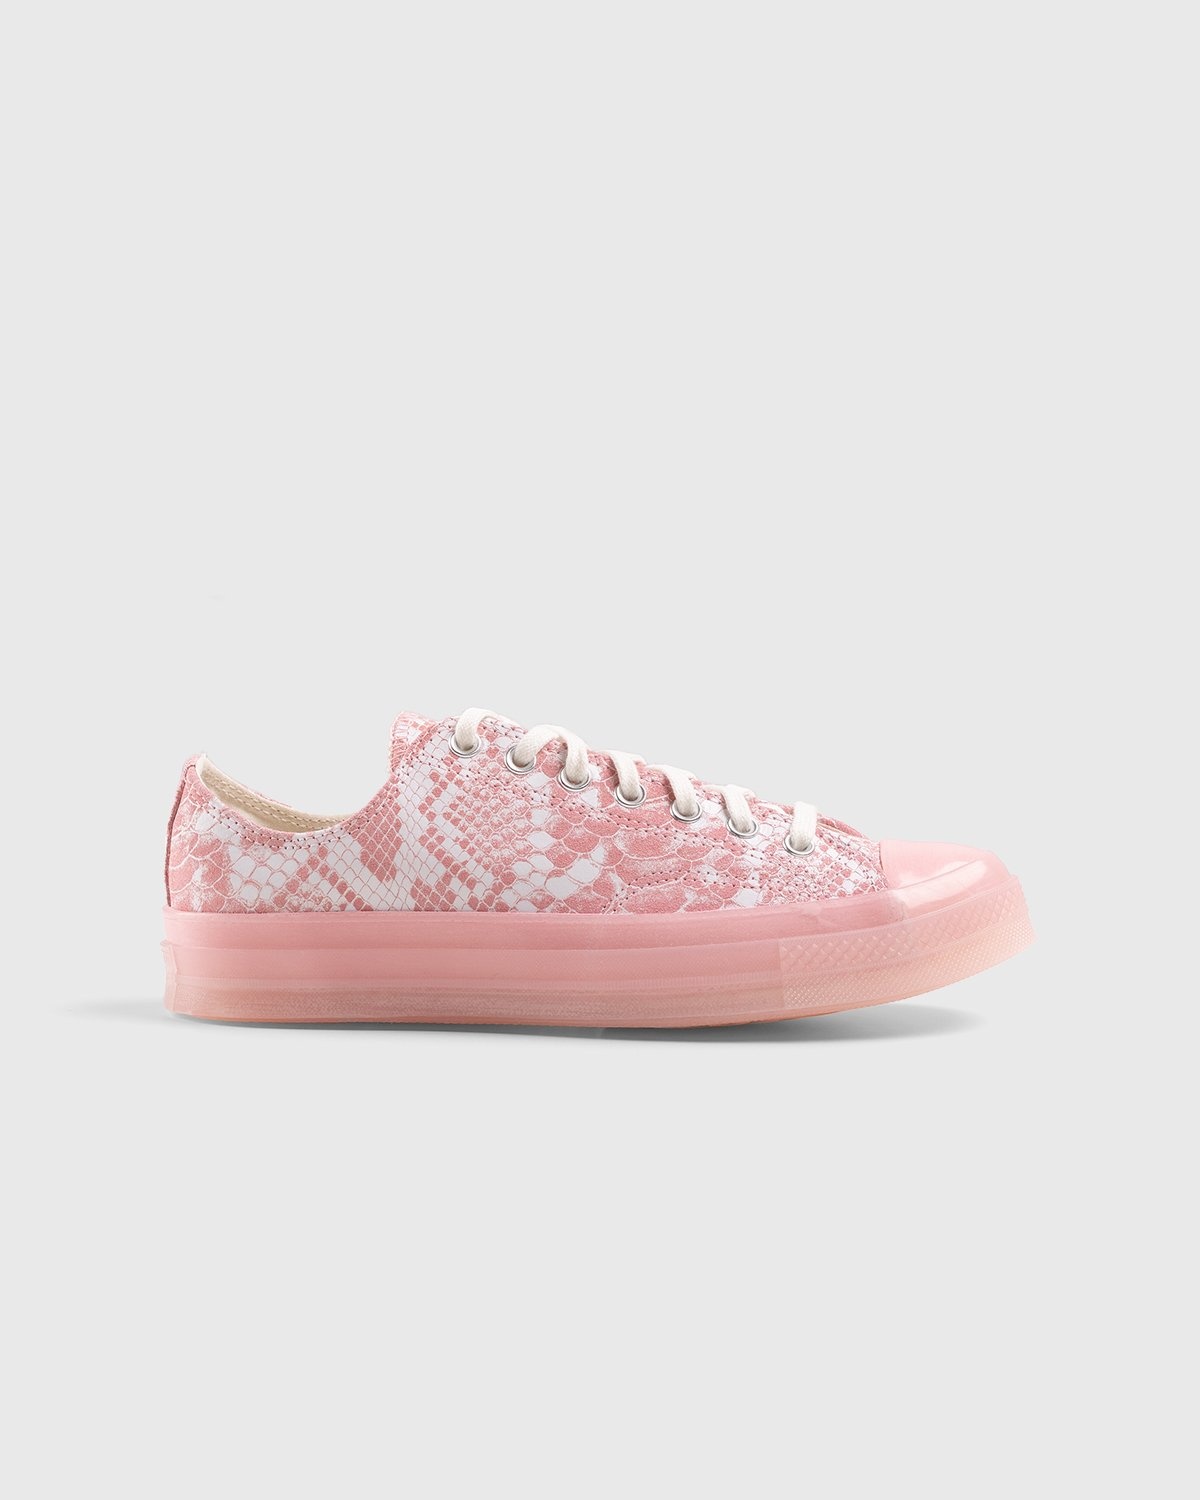 Converse x GOLF WANG – Chuck 70 Ox Python Pink Dogwood Vintage White - Low Top Sneakers - Pink - Image 1